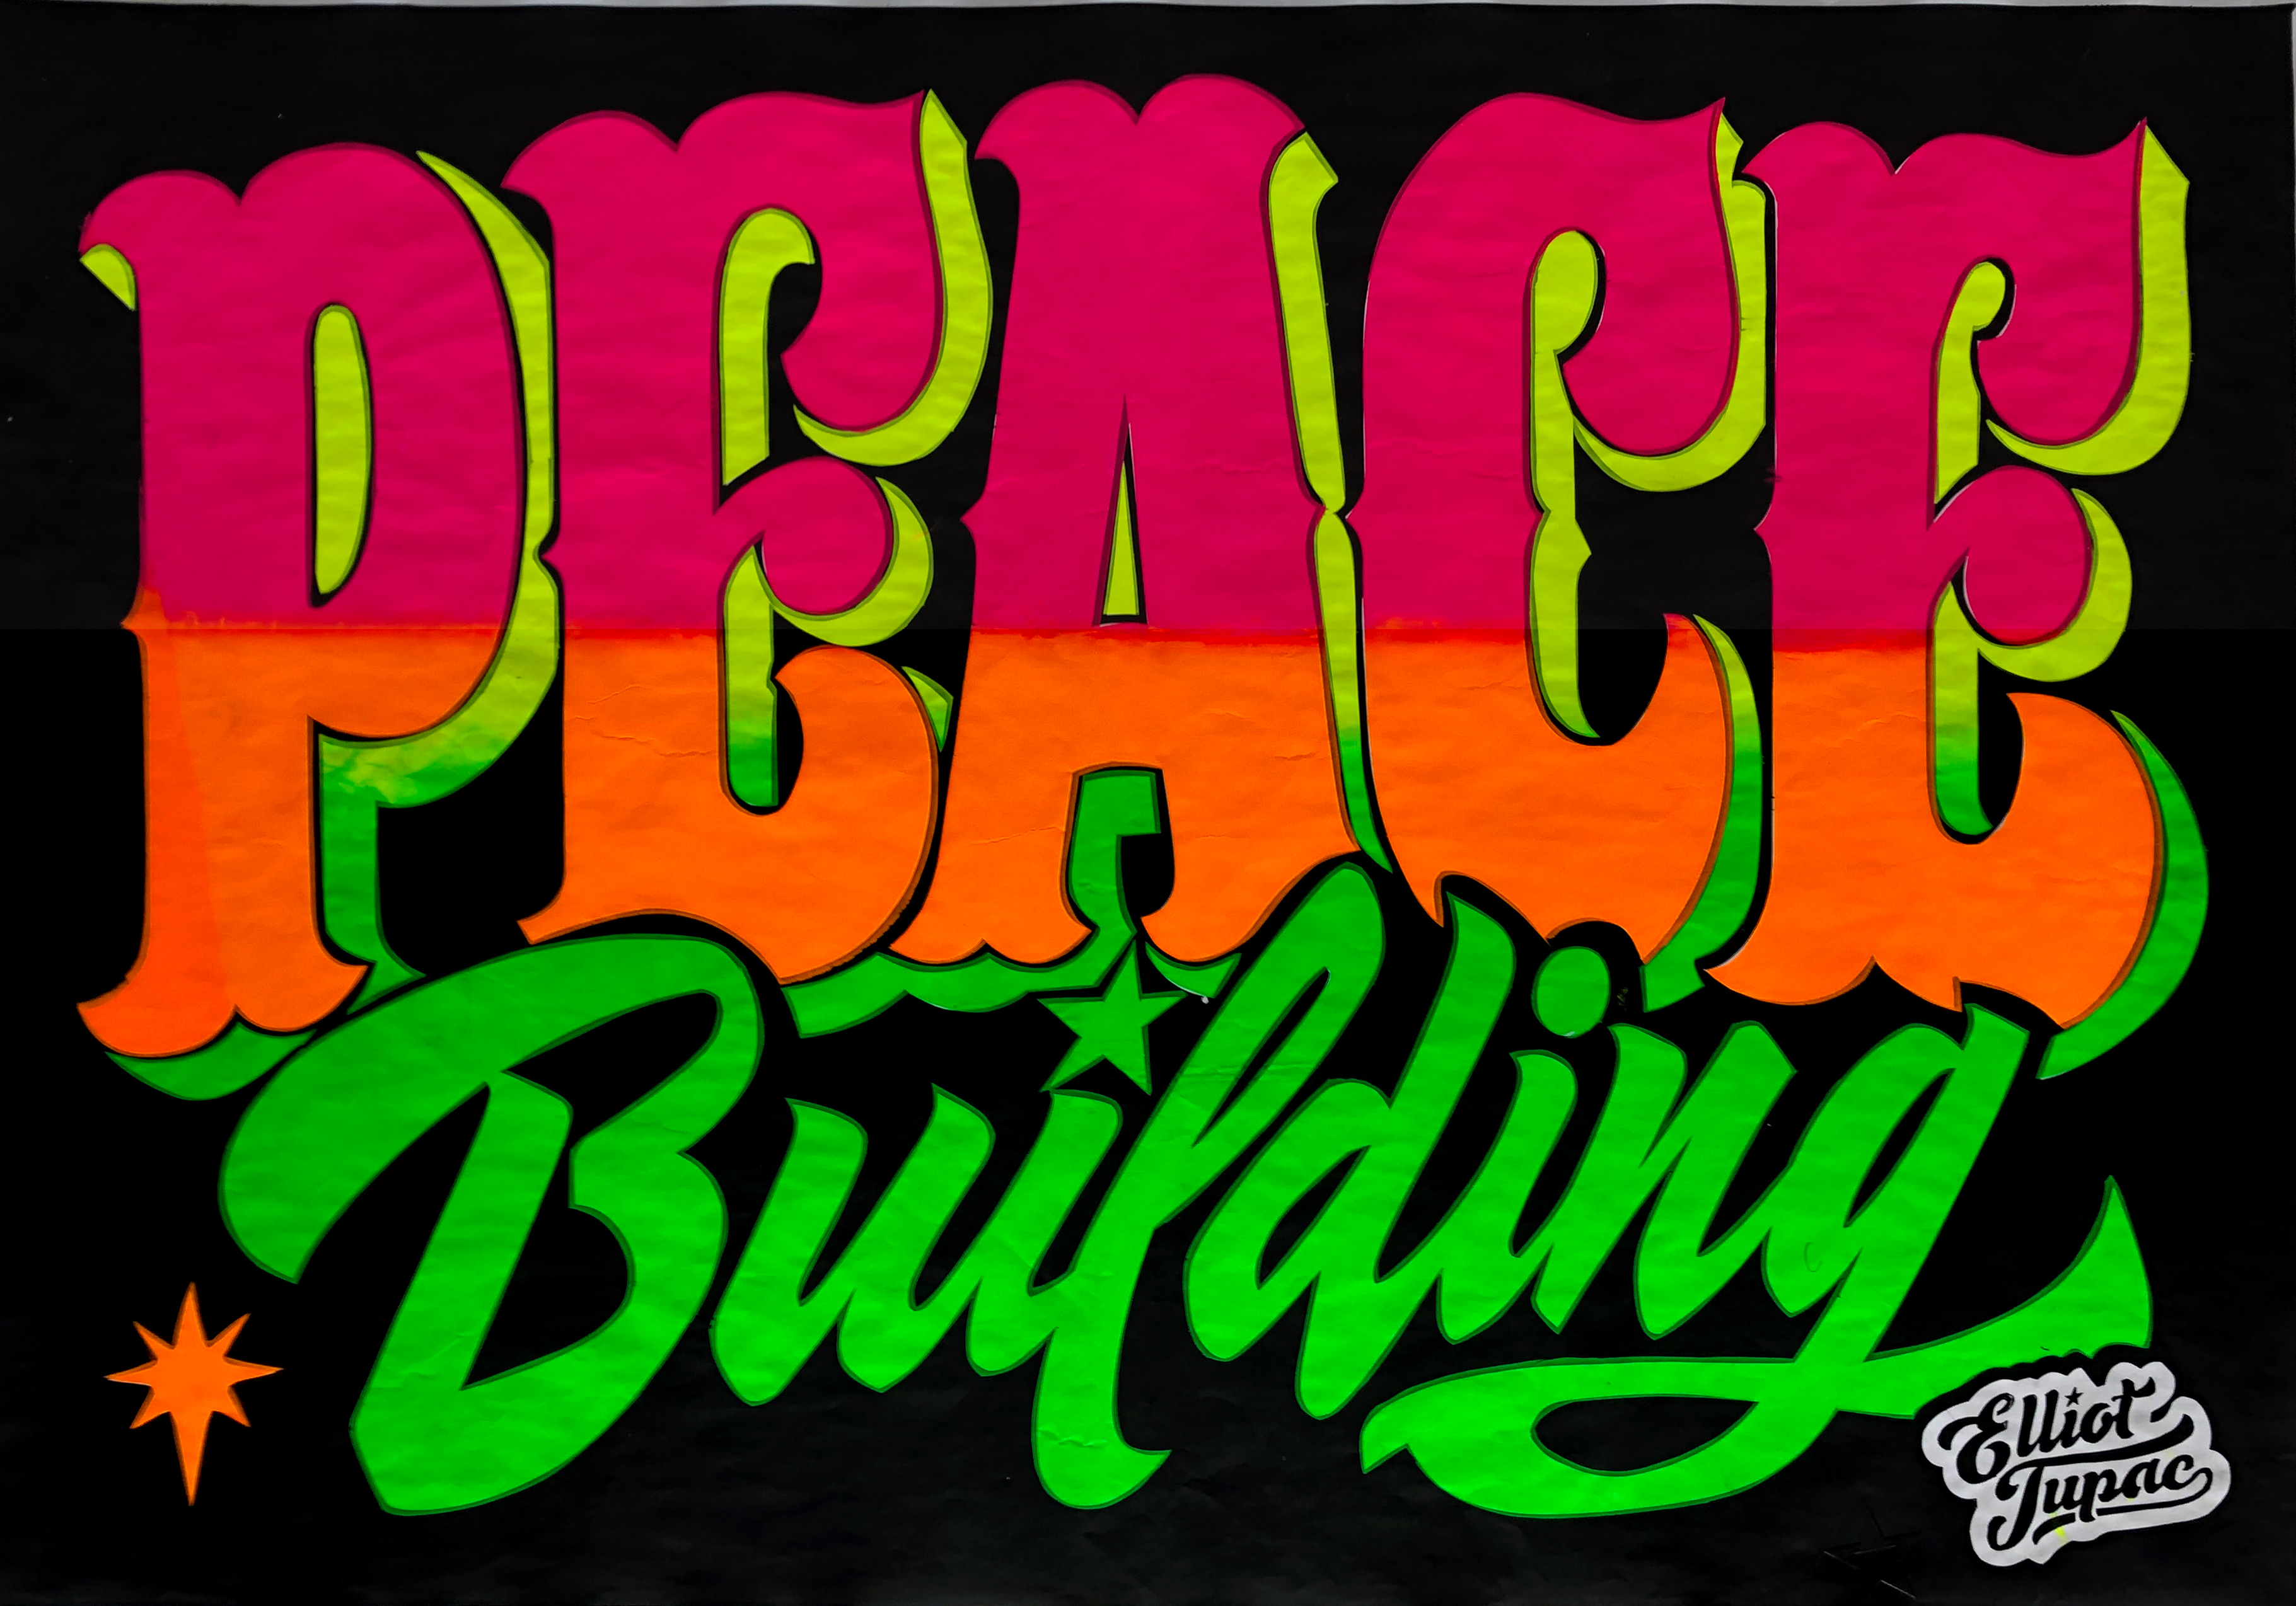 black poster with large scripted text in bright green and red letters spelling out "PEACE Building""